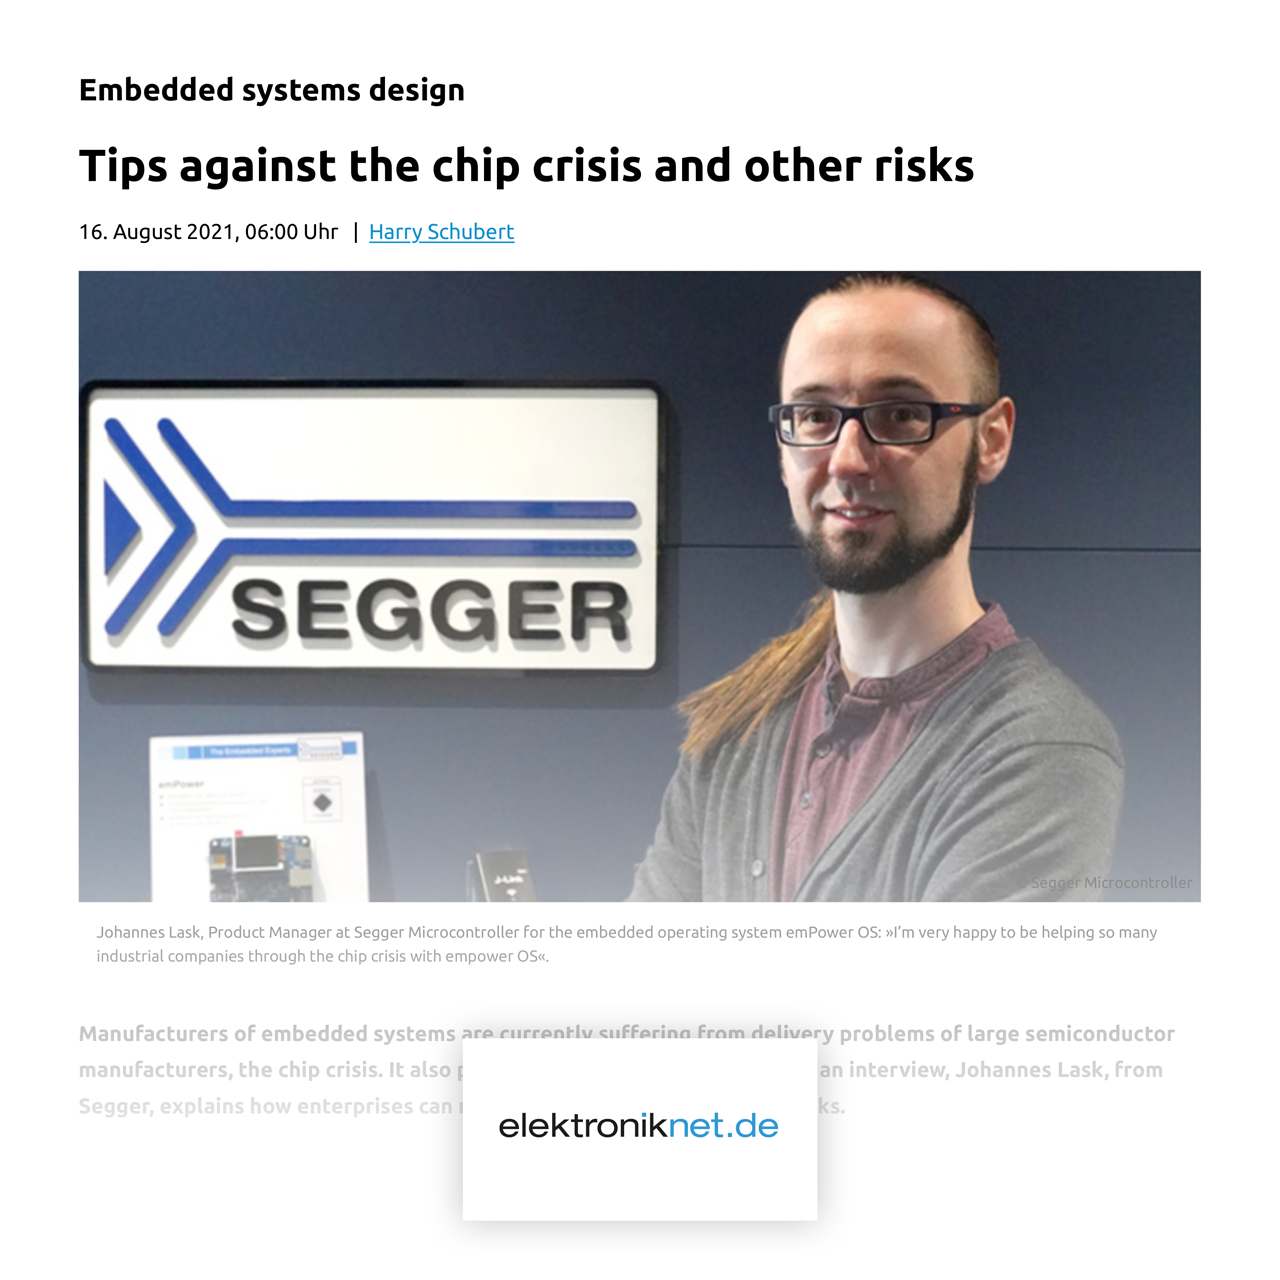 SEGGER Press: Embedded systems design — Tips against the chip crisis and other risks